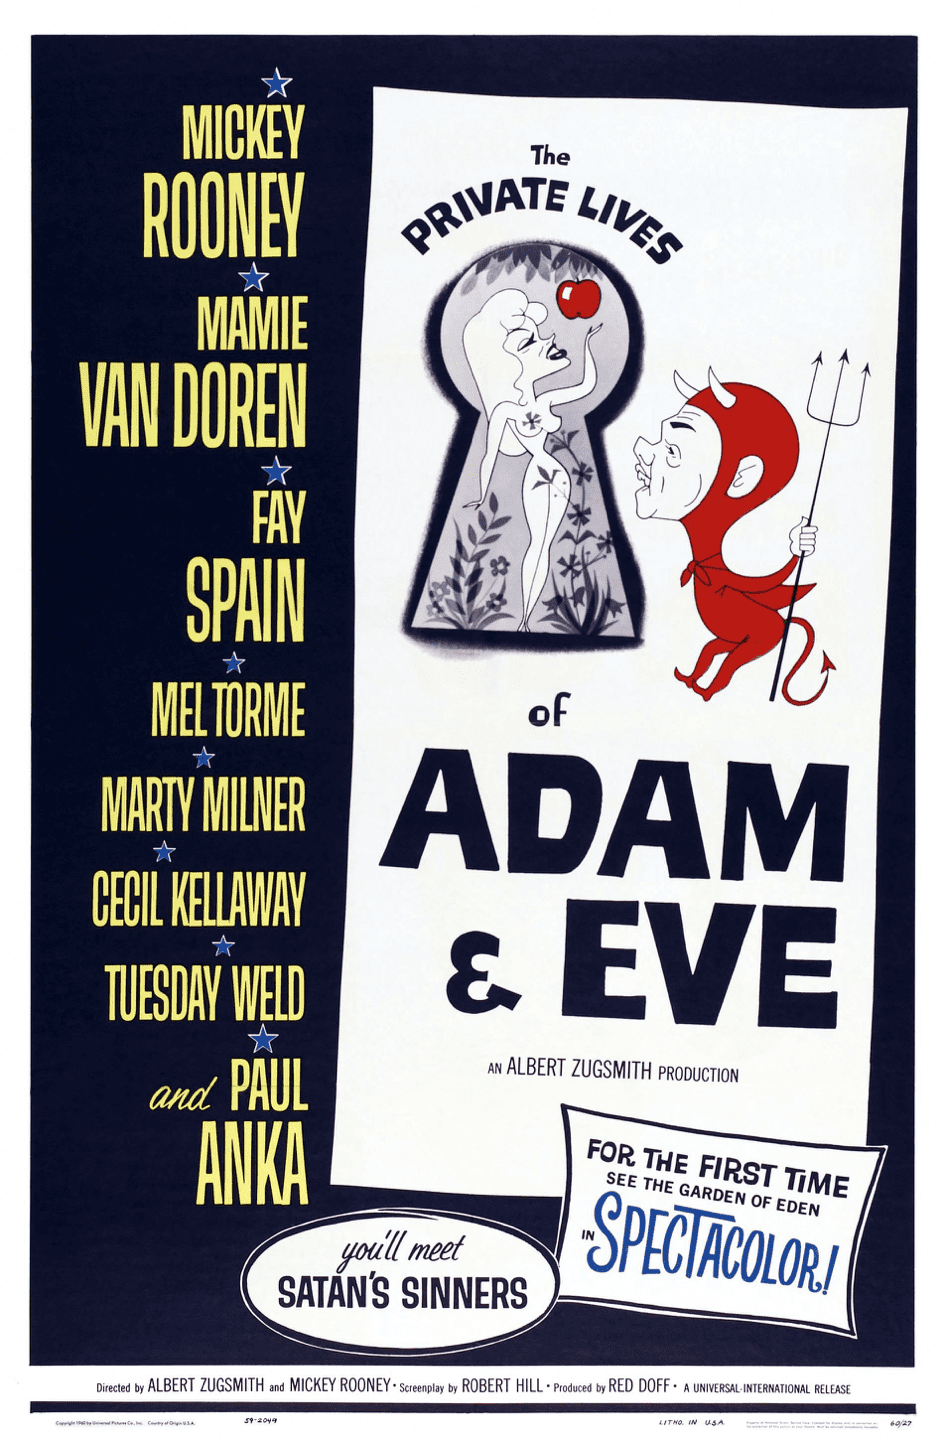 Poster für "The Private Lives Of Adam And Eve", ein weiterer Bacon Film, 1960 | Quelle: Getty Images